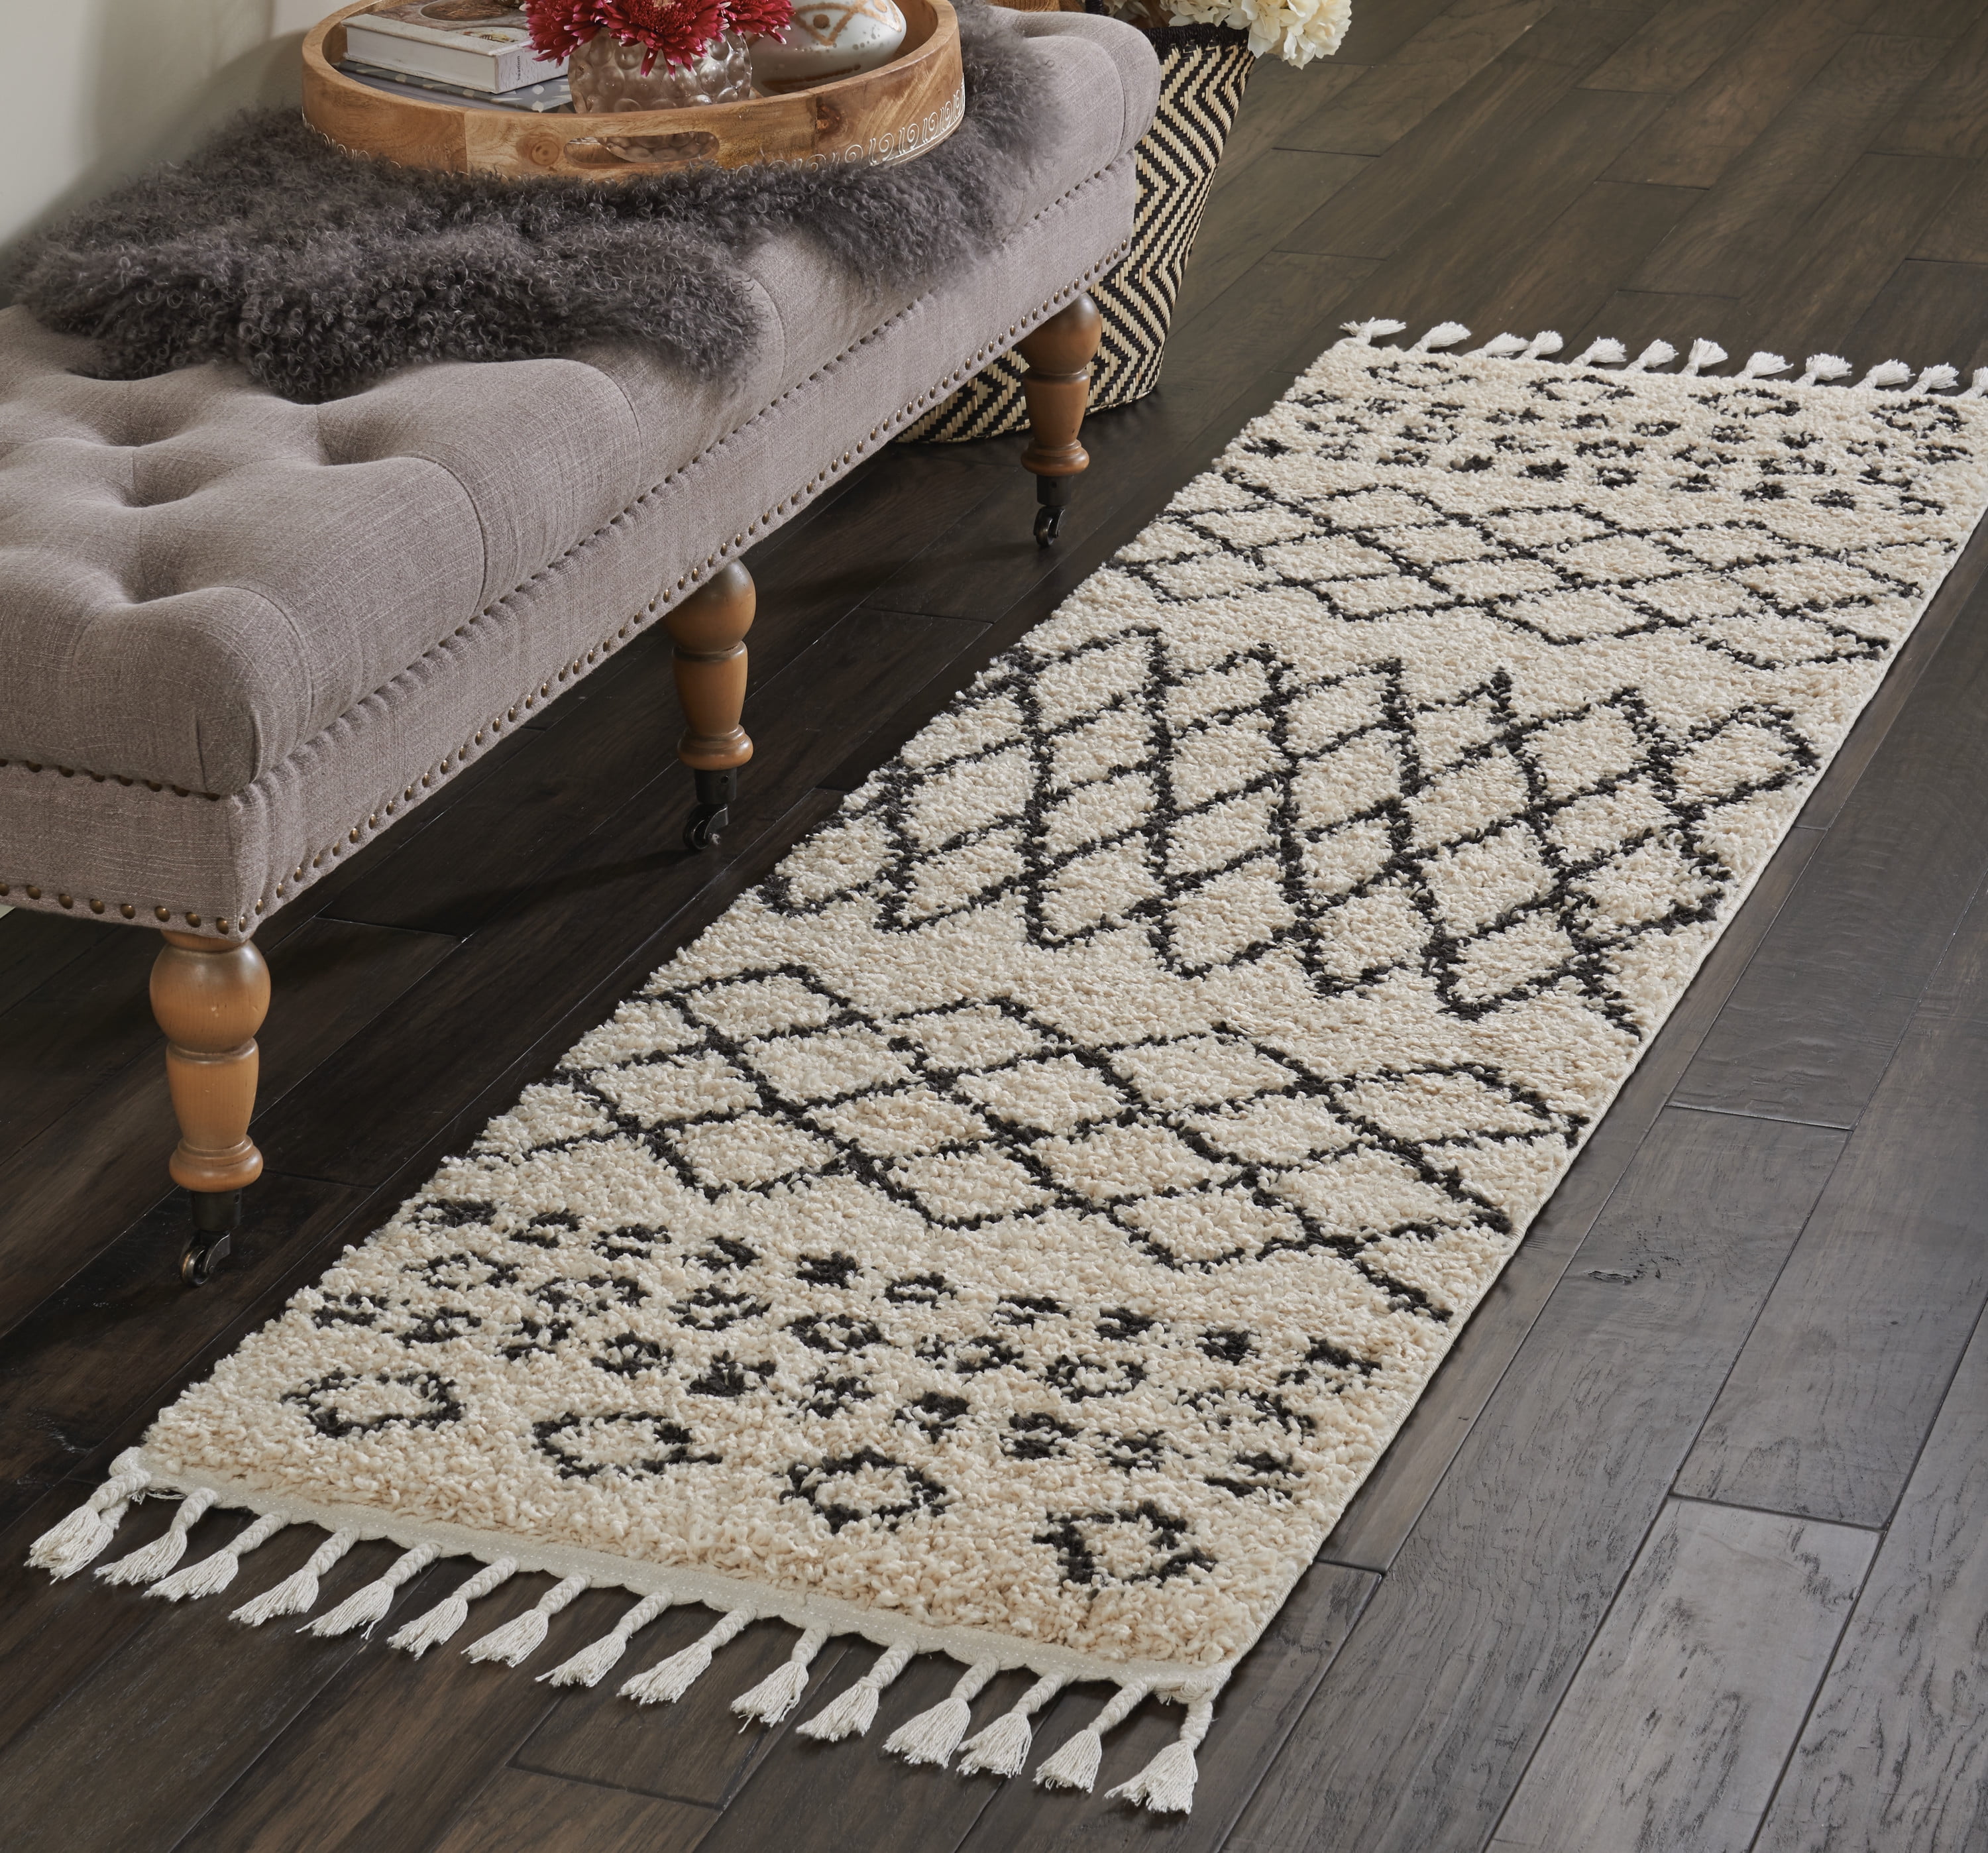 Details about   MORAVIA CREAM GREY TRADITIONAL ORIENTAL MODERN RUG RUNNER 2 Sizes **NEW** 